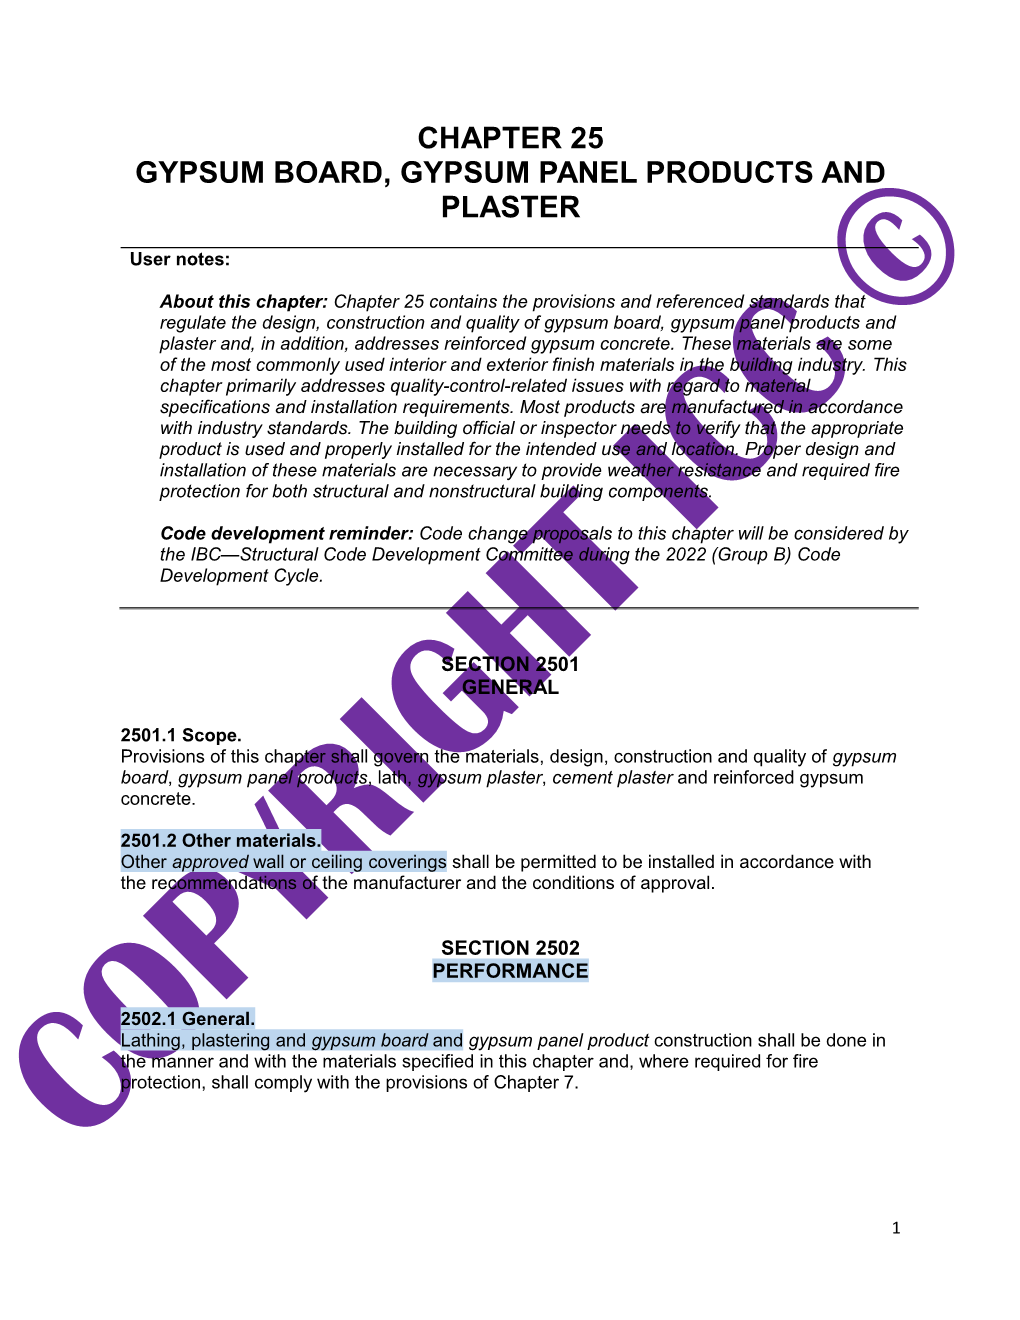 Chapter 25 Gypsum Board, Gypsum Panel Products and Plaster